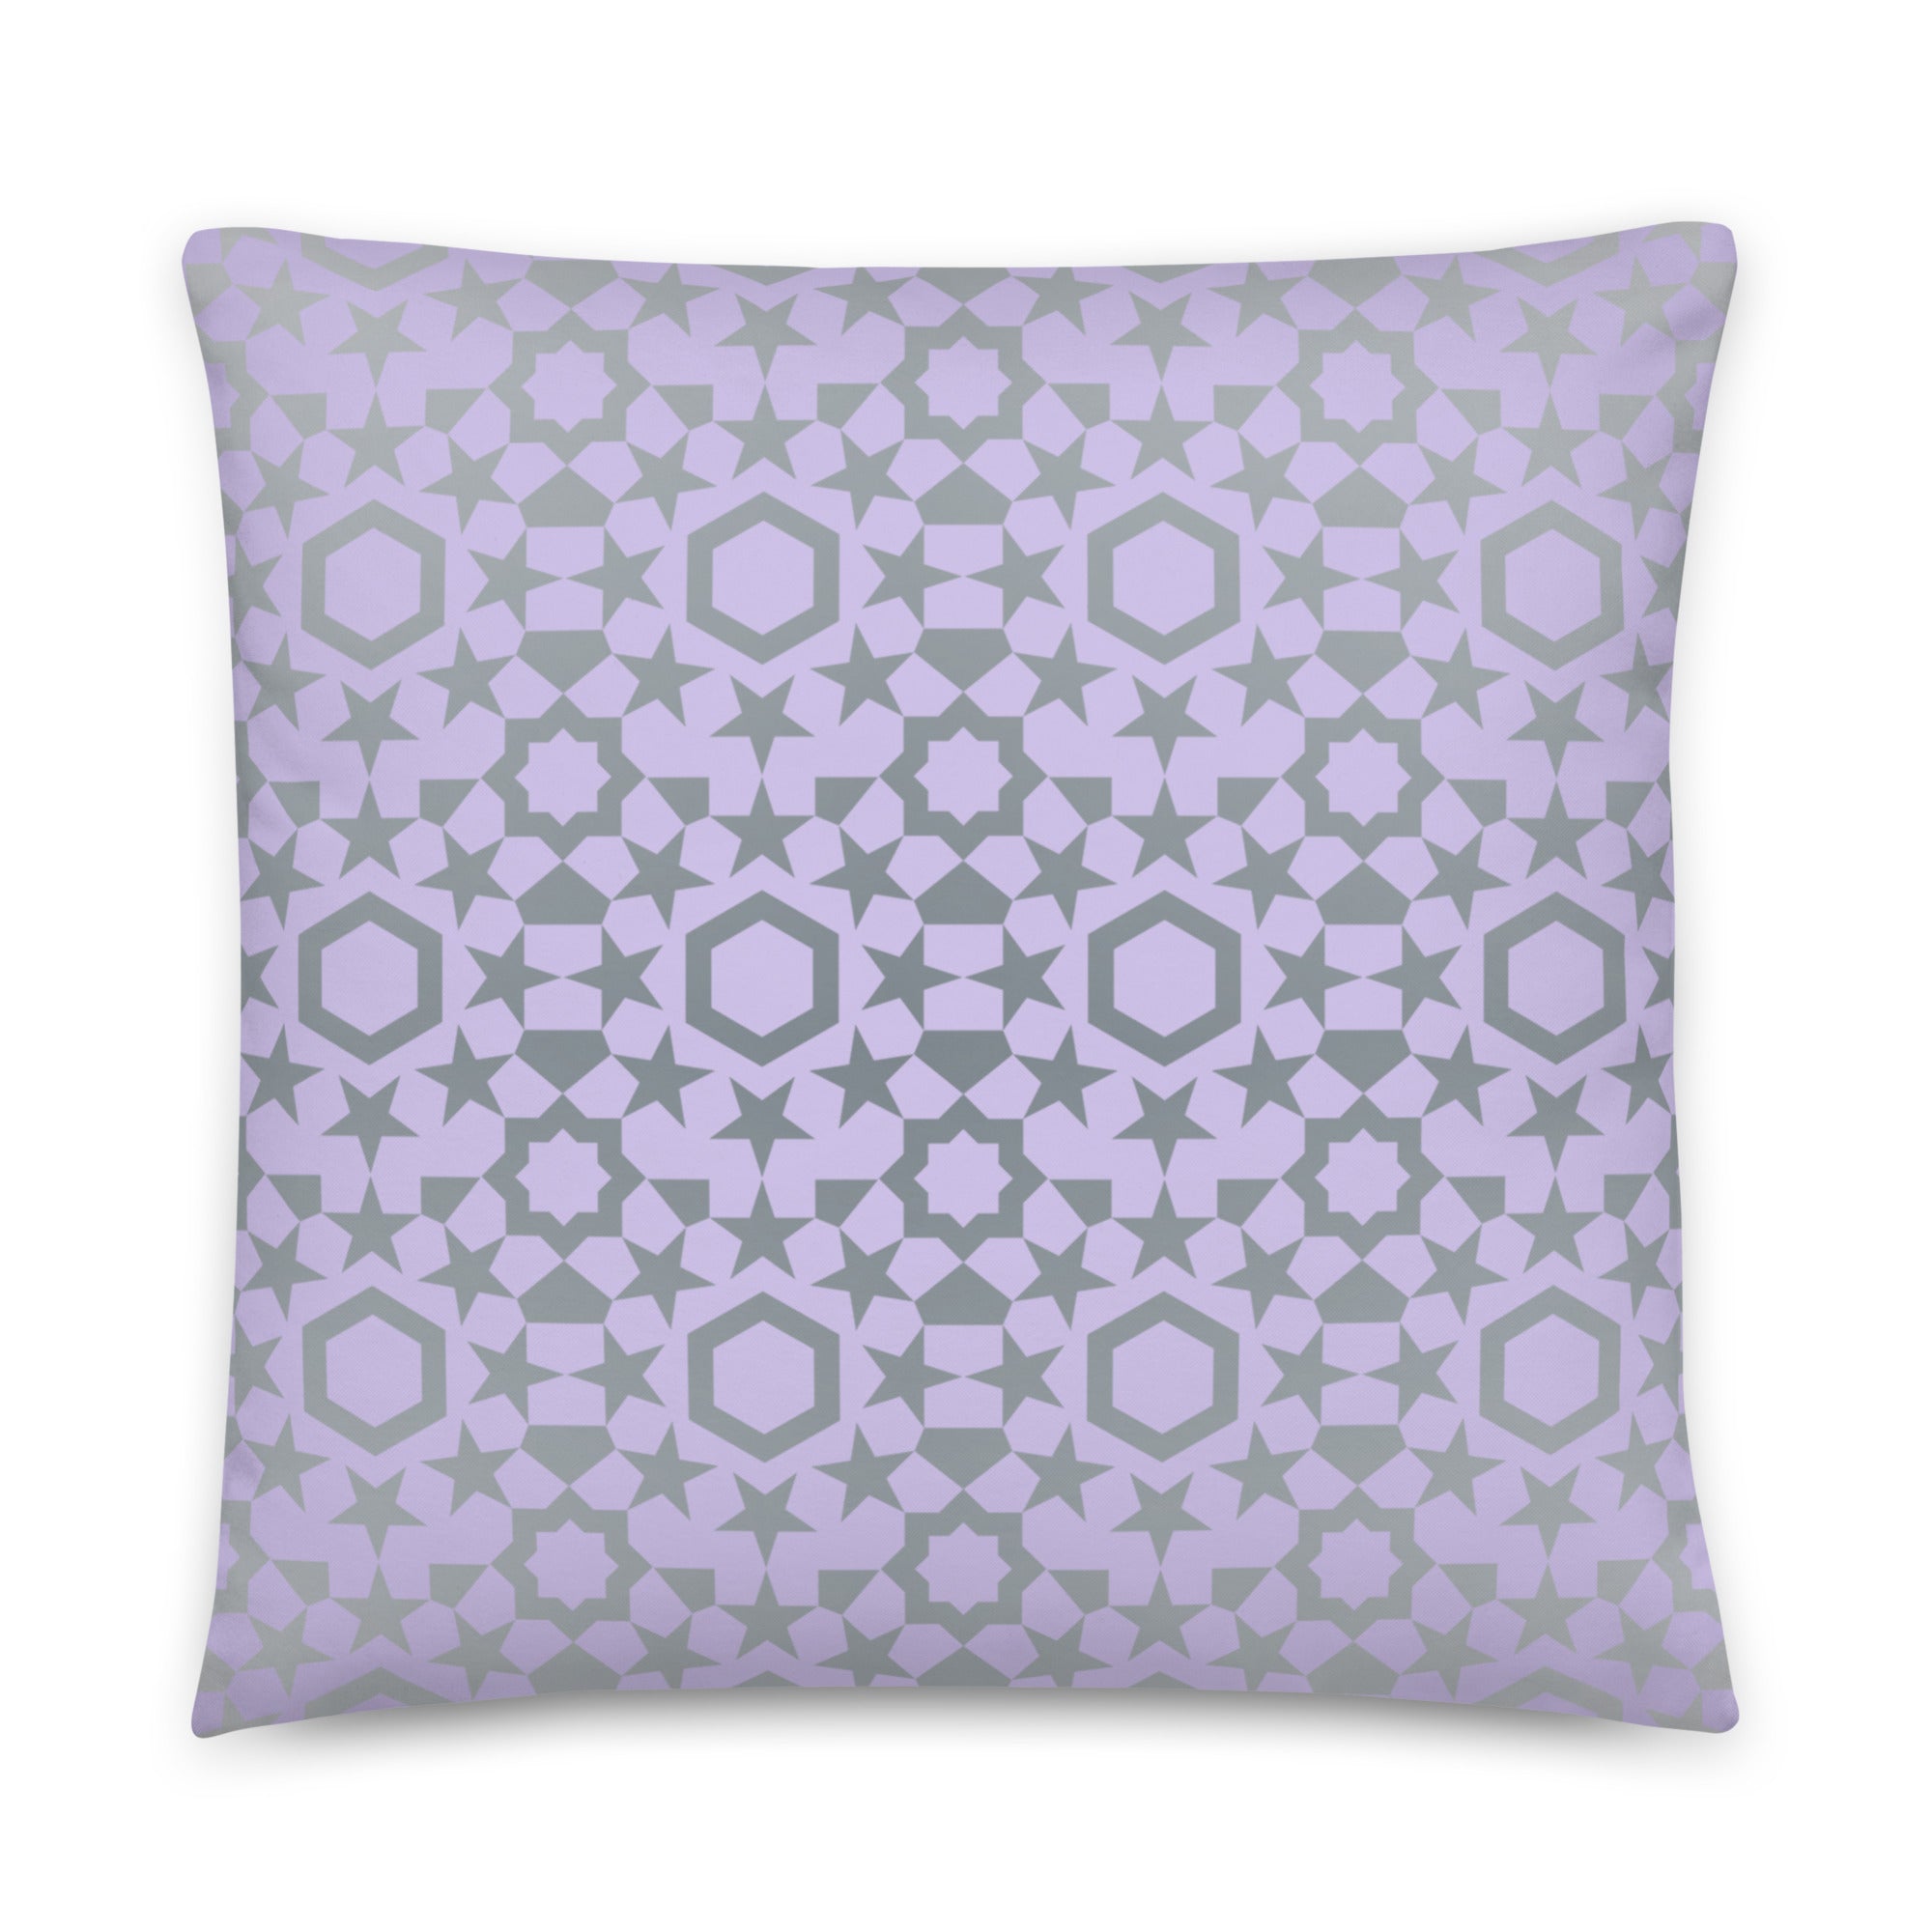 The set features a variety of eye-catching designs, from bold squares and triangles to intricate circles and hexagons. Made from soft and durable fabrics, these cushions offer both comfort and style.